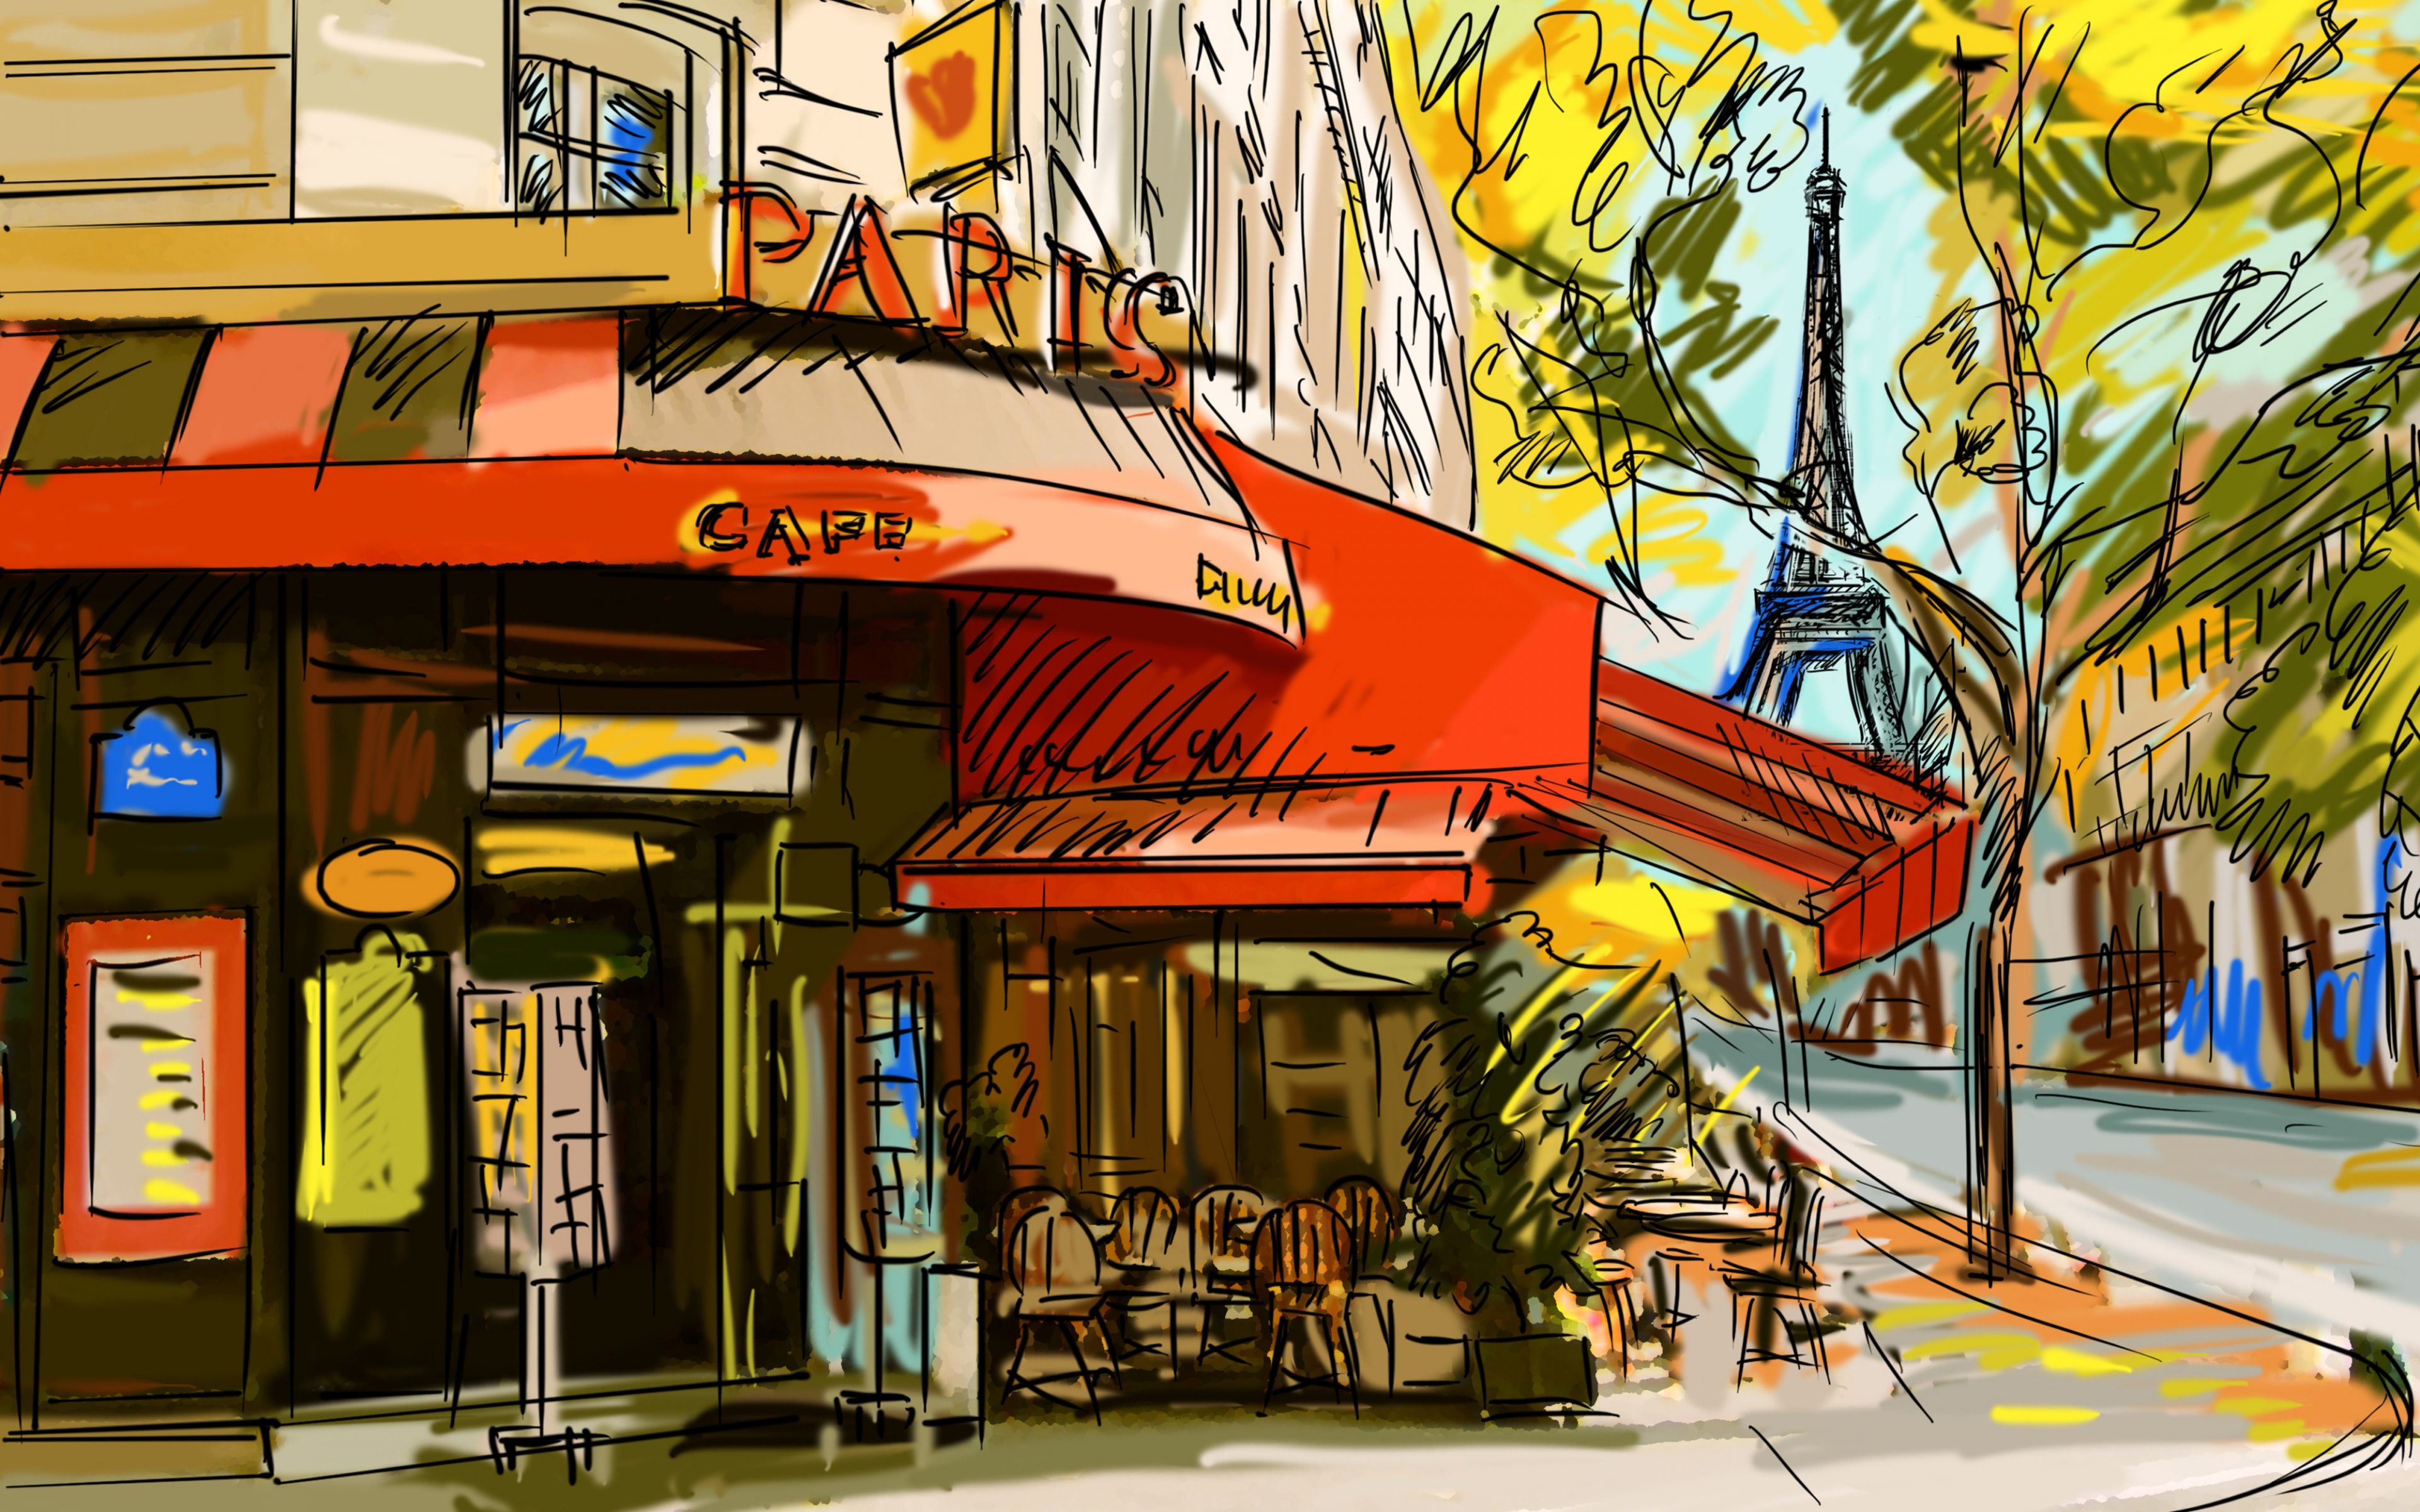 Download Wallpaper 3840x2400 France, Cafe, Picture, Paris Ultra HD